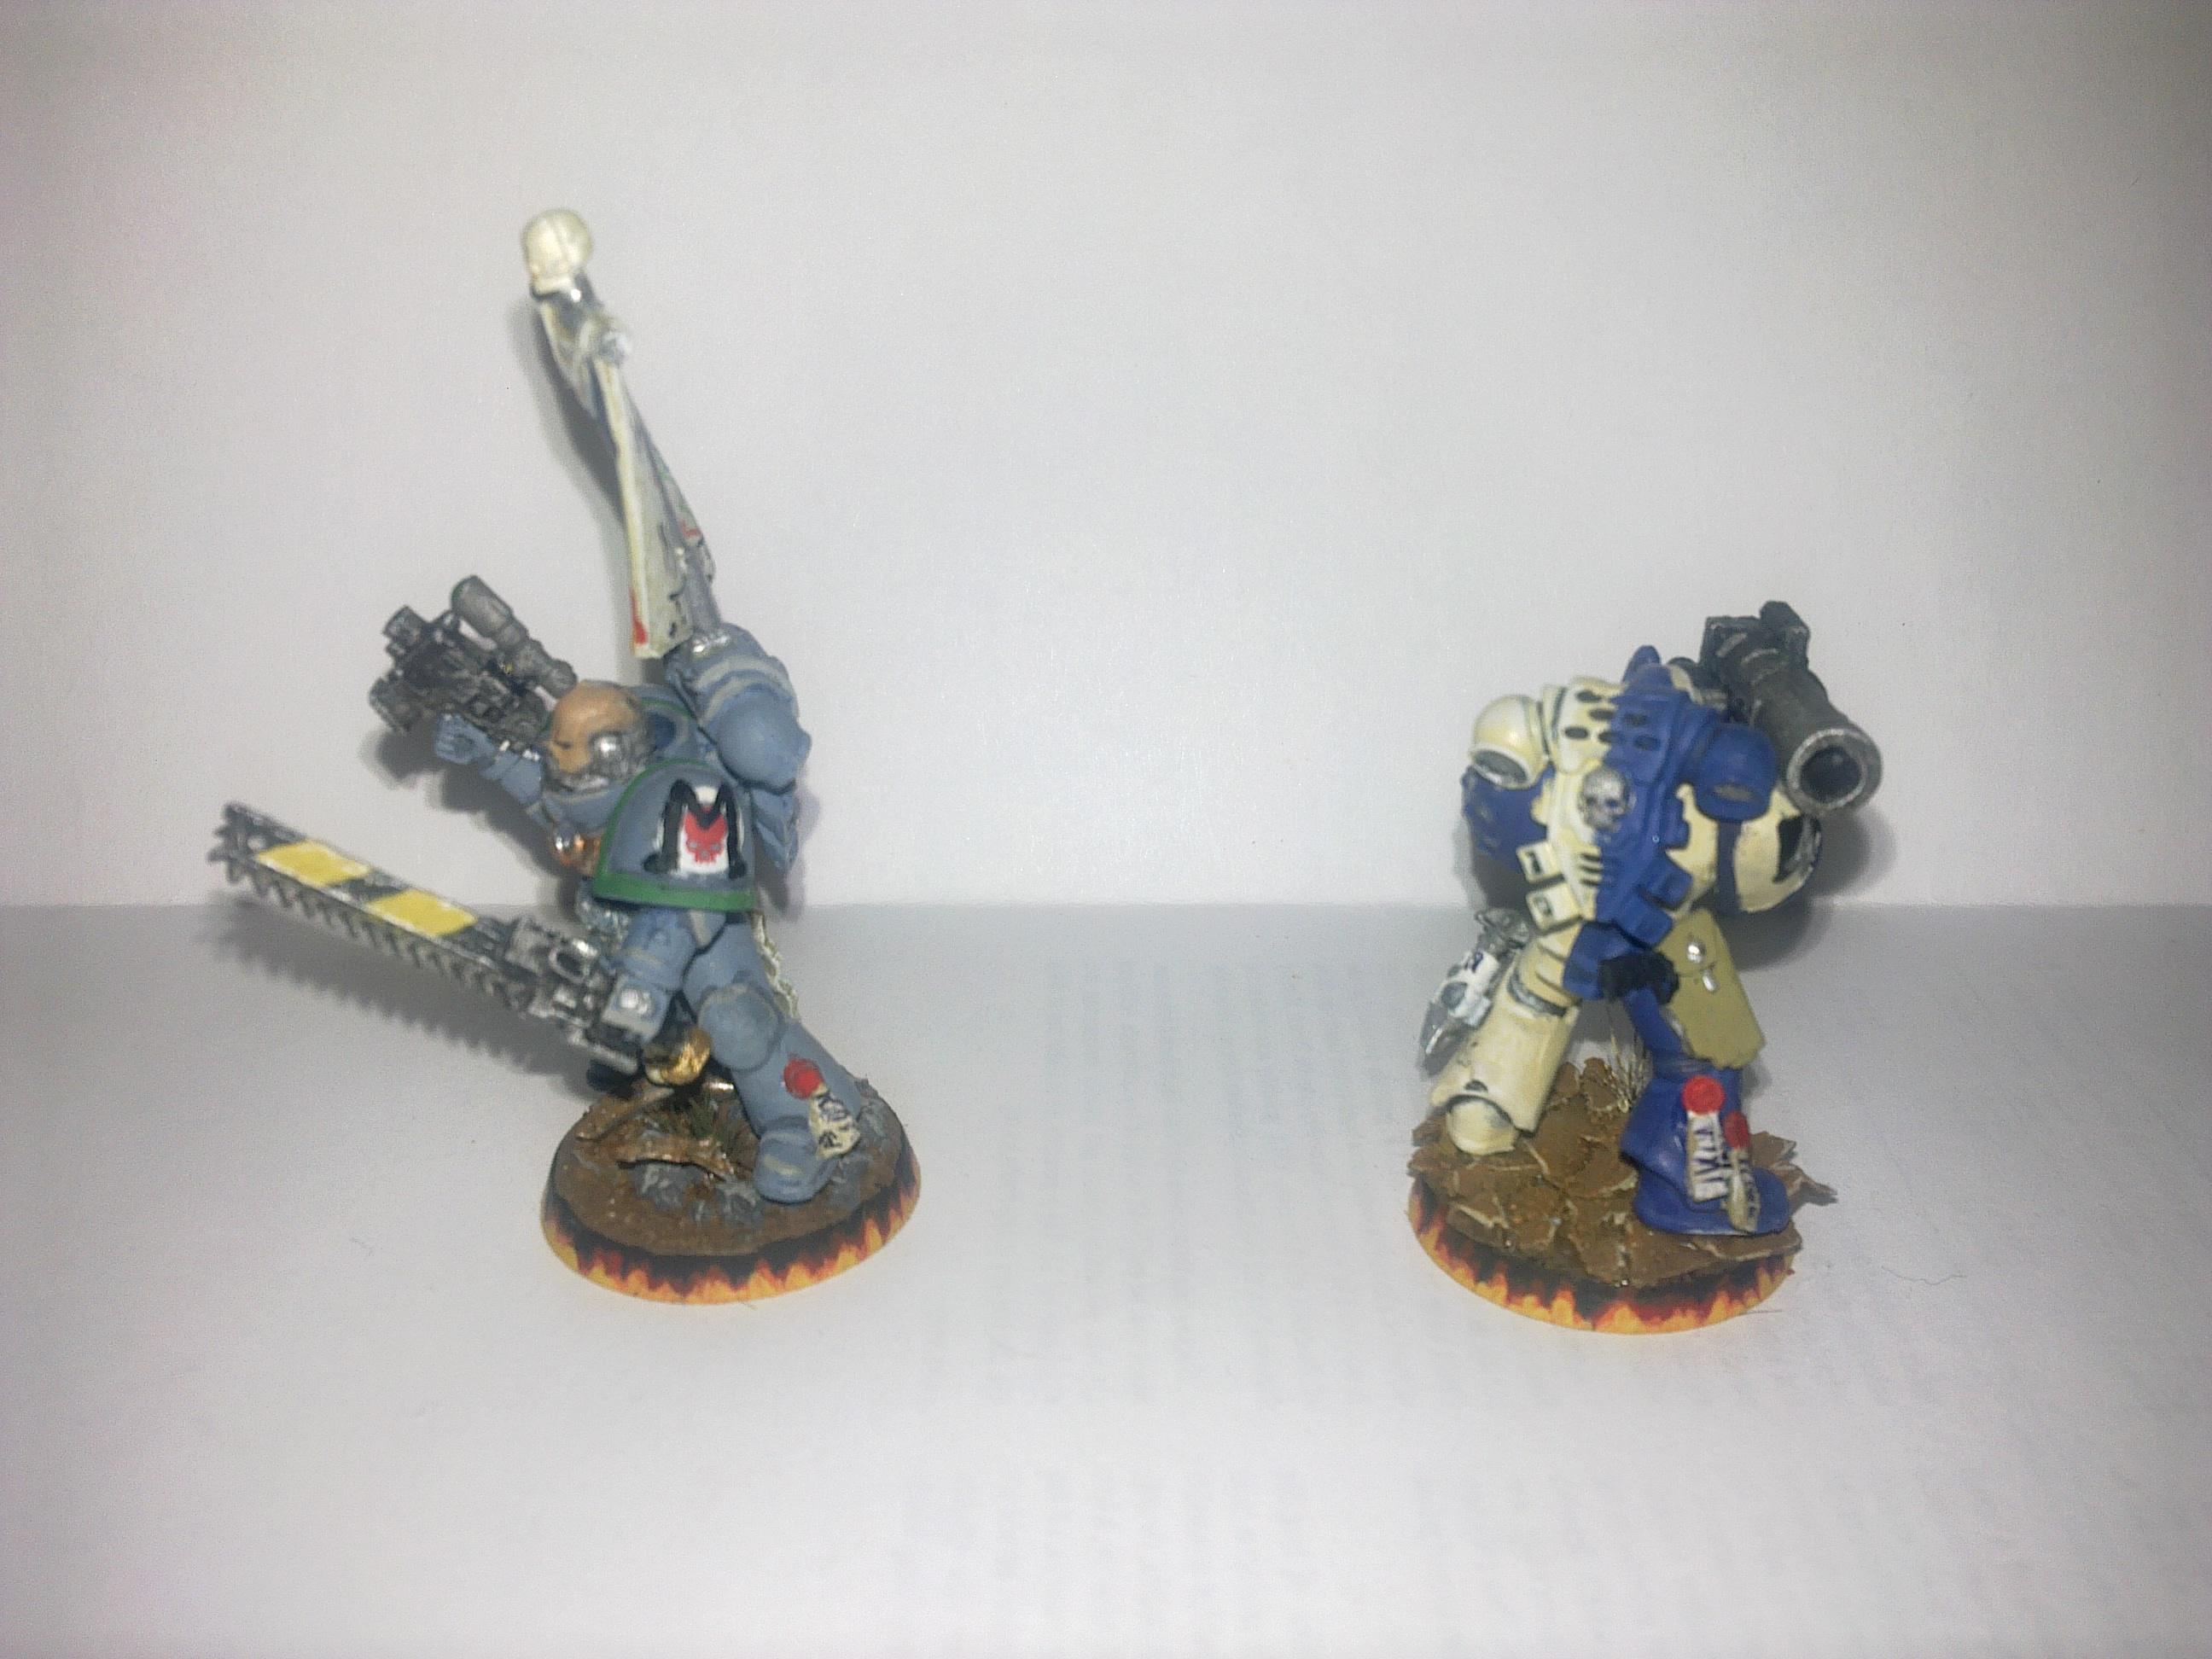 Chainsword And Bolt Pistol, Missile Launcher, Novamarine, Spacemarine. Brotherhood Of A Thousand, Warhammer 40,000